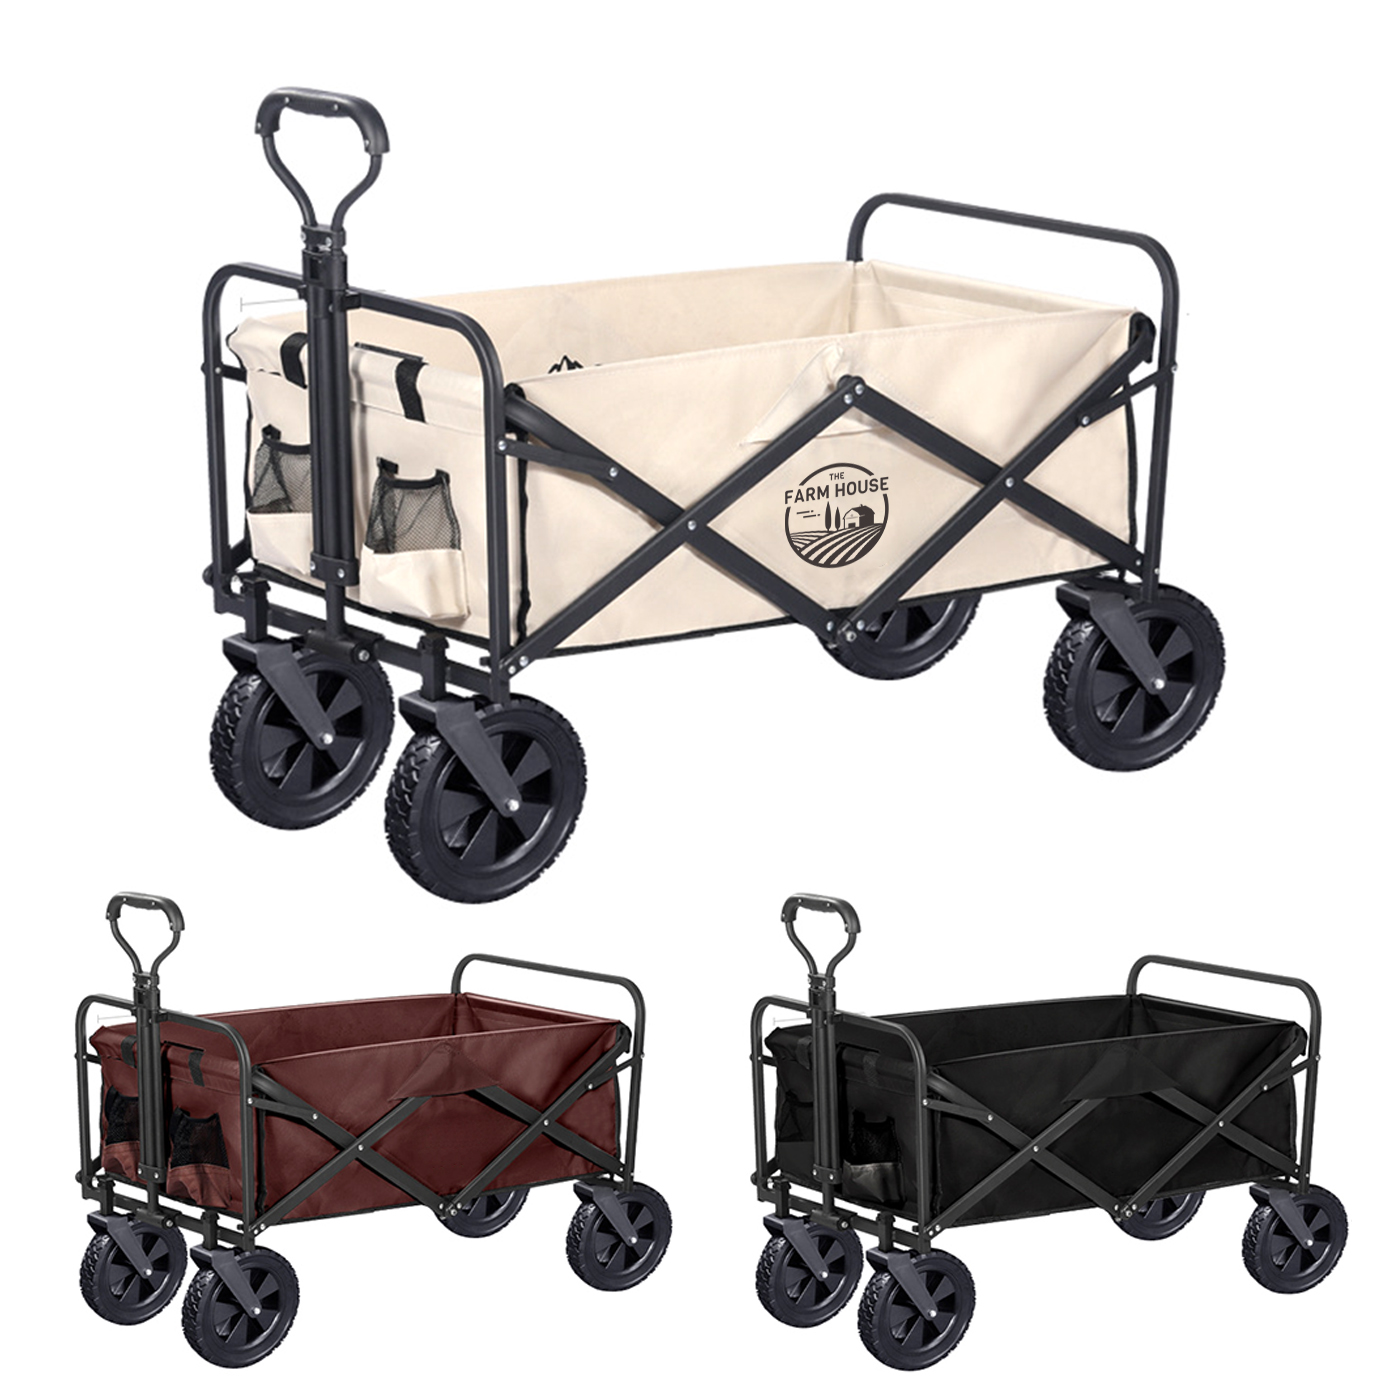 Collapsible Folding Camping Wagon With Desktop1